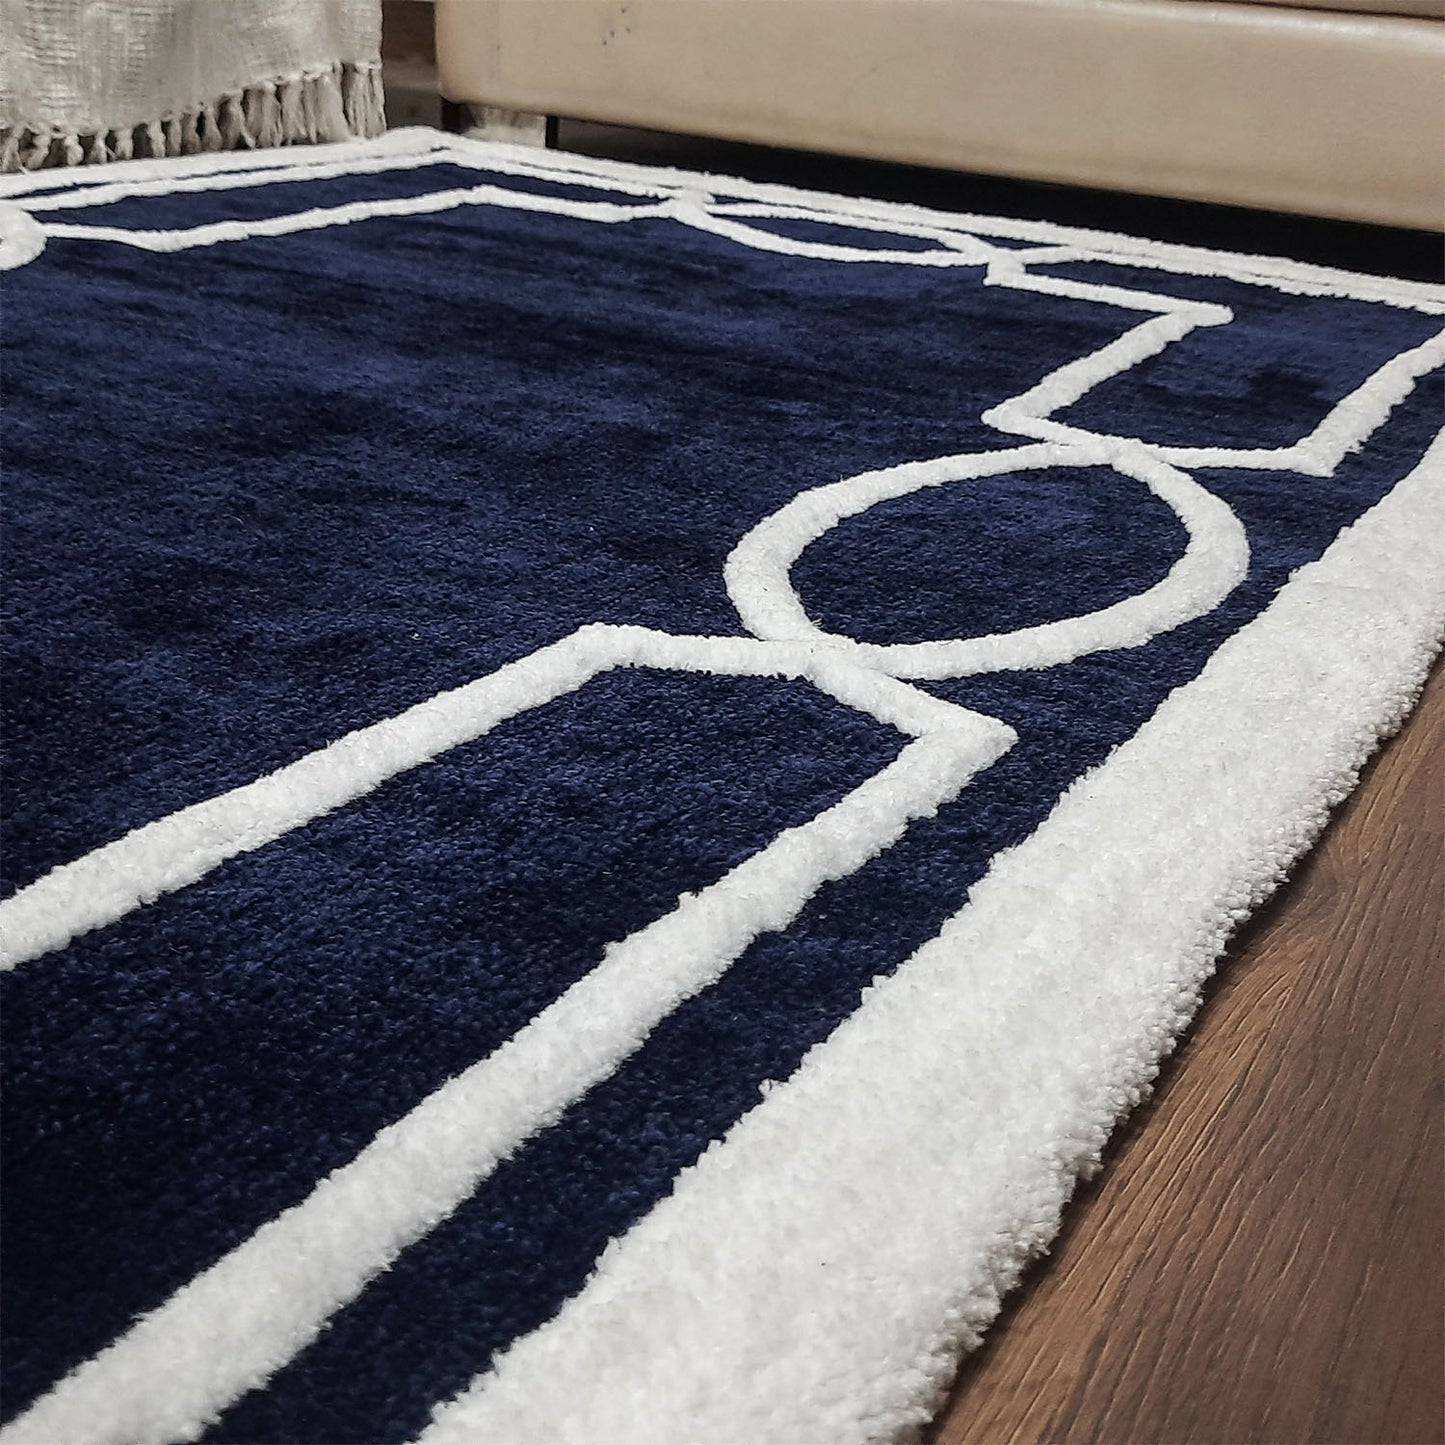 Avioni Luxury Collection- Plush Luxury Blue and White Tone Carpet with 3d Traditional Design -Different Sizes Shaggy Fluffy Rugs and Carpet for Living Room